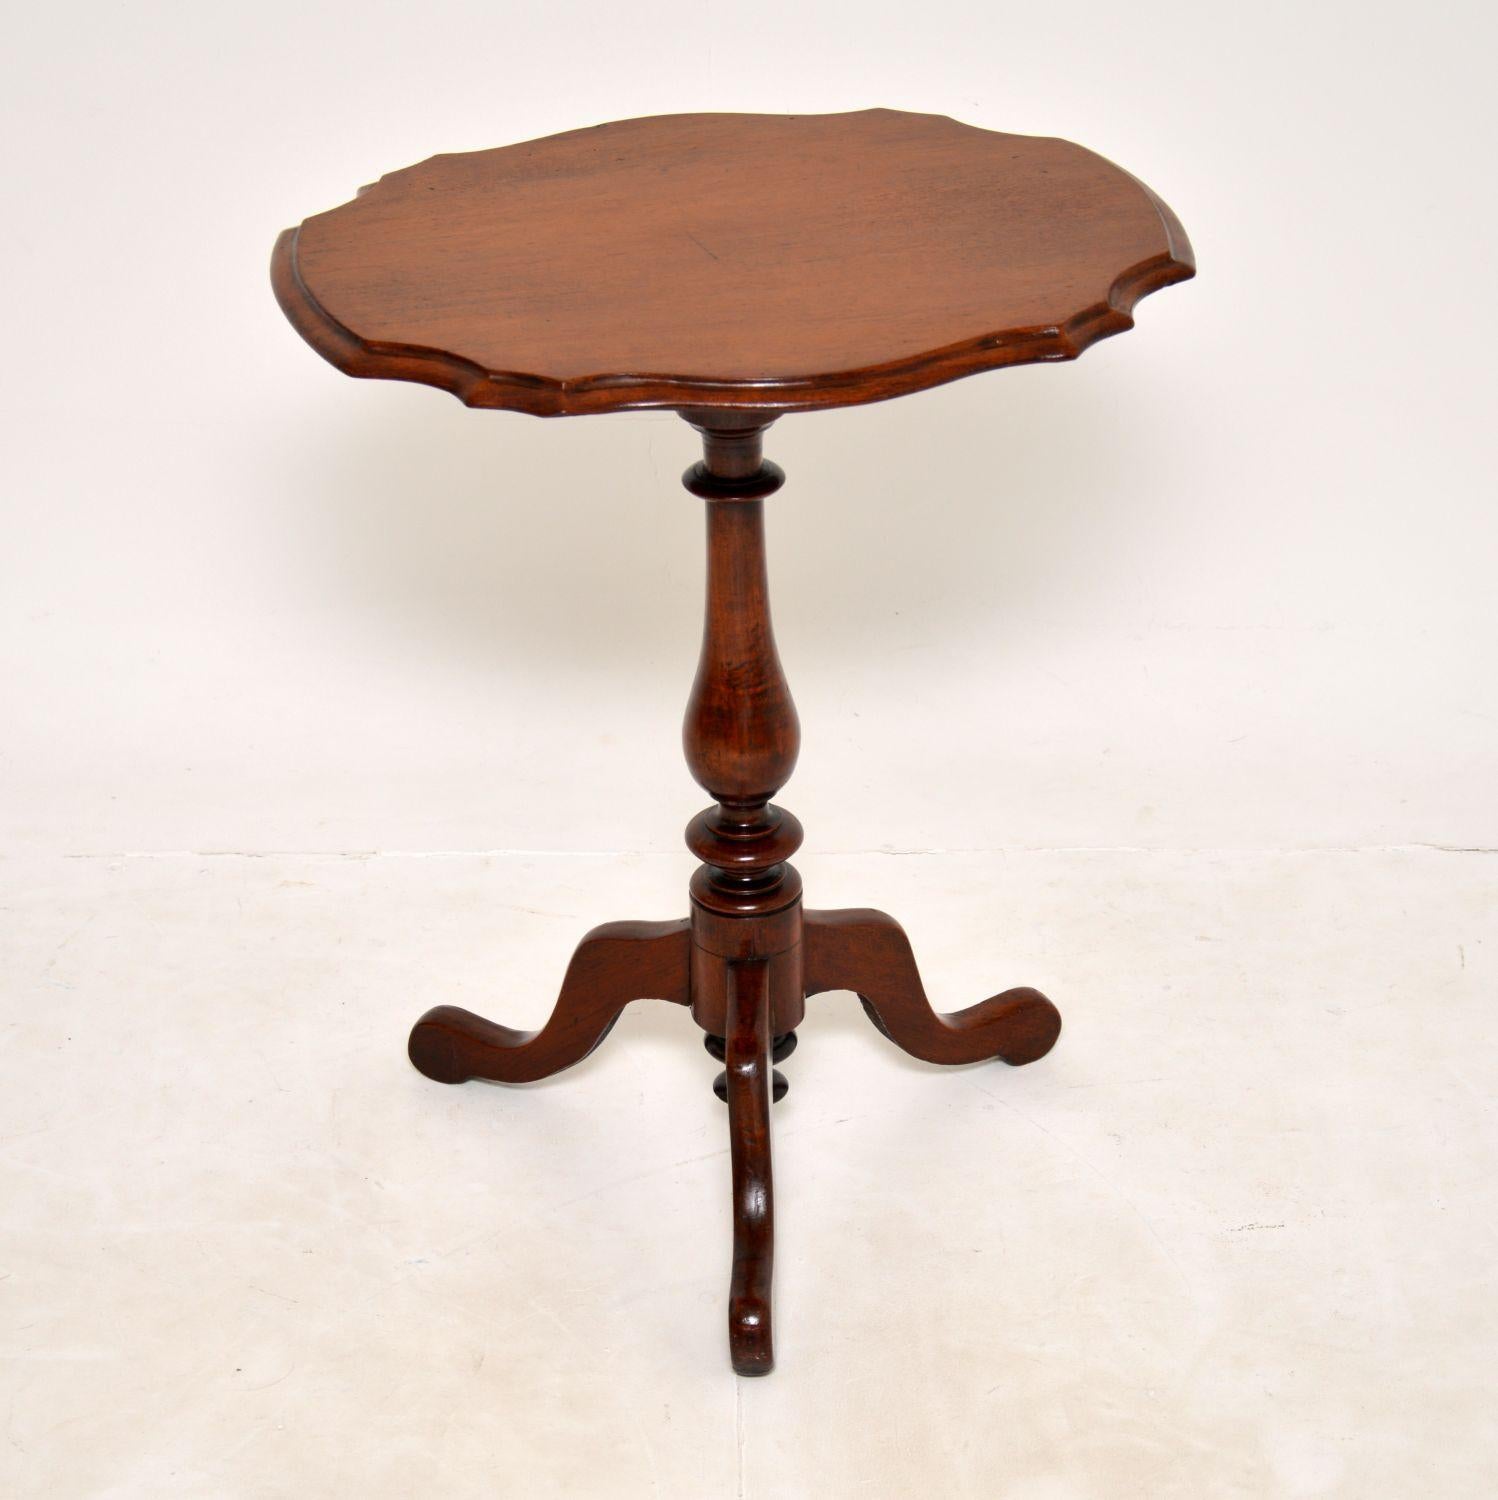 A lovely antique Victorian period occasional table in wood. This was made in England, it dates from around the 1860-1880’s.

The quality is excellent and it is a very useful size. The top has beautiful serpentine shaped edges, and sits on a tripod